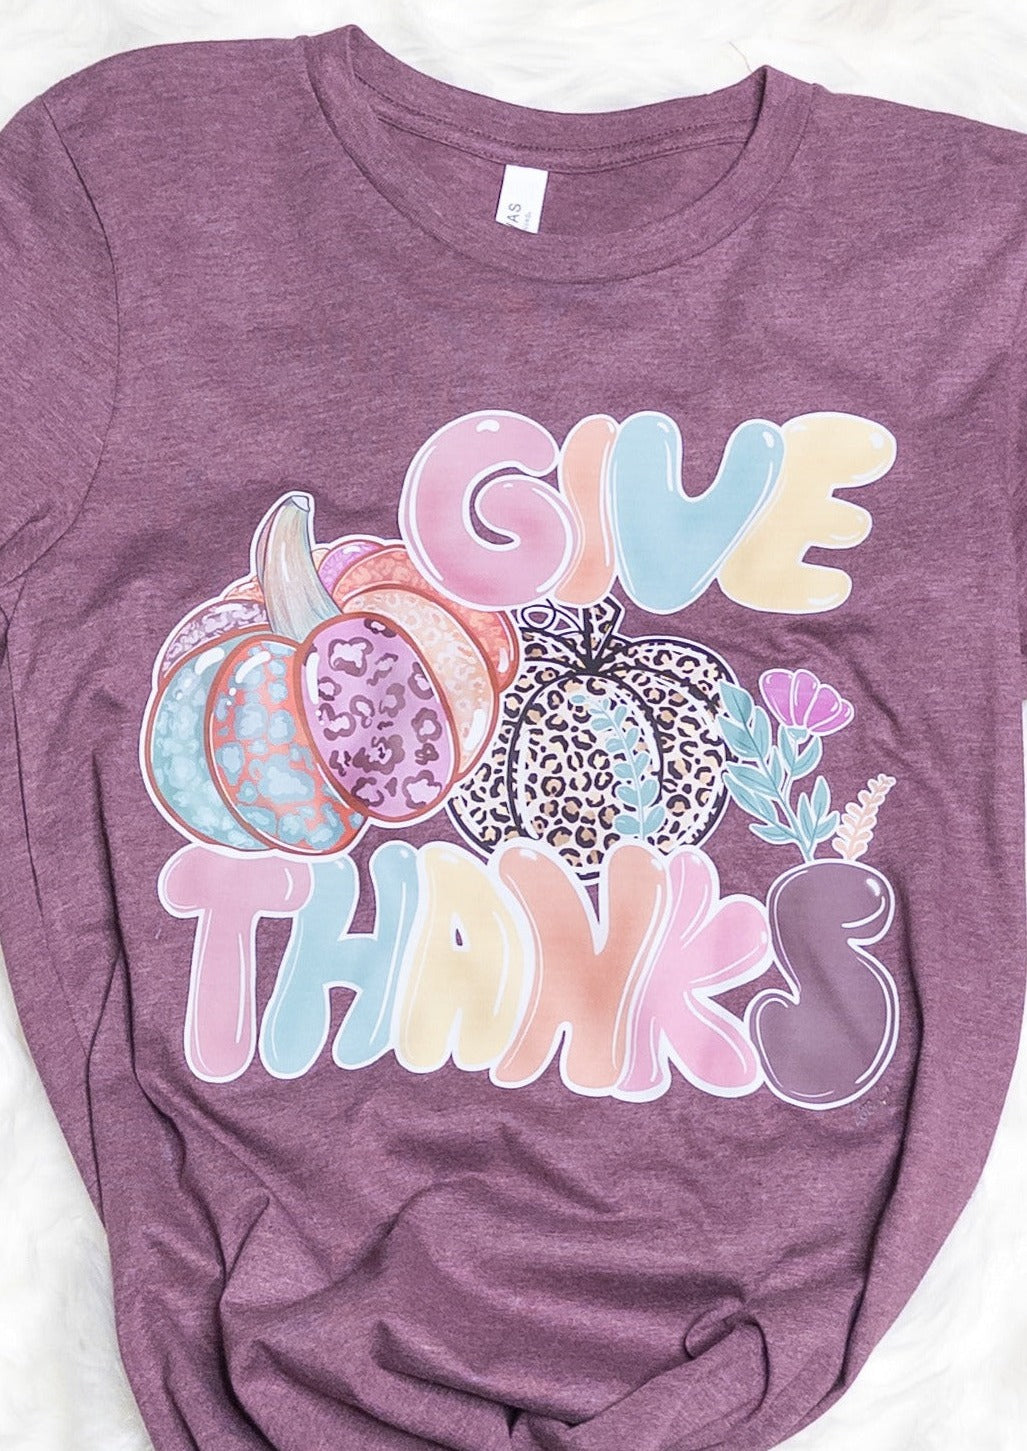 Deep mauve color tee shirt with bubble lettering that says "give thanks" in pale fall colors and 2 pumpkins. 1 pumpkin is animal print, the other is light fall color animal print.